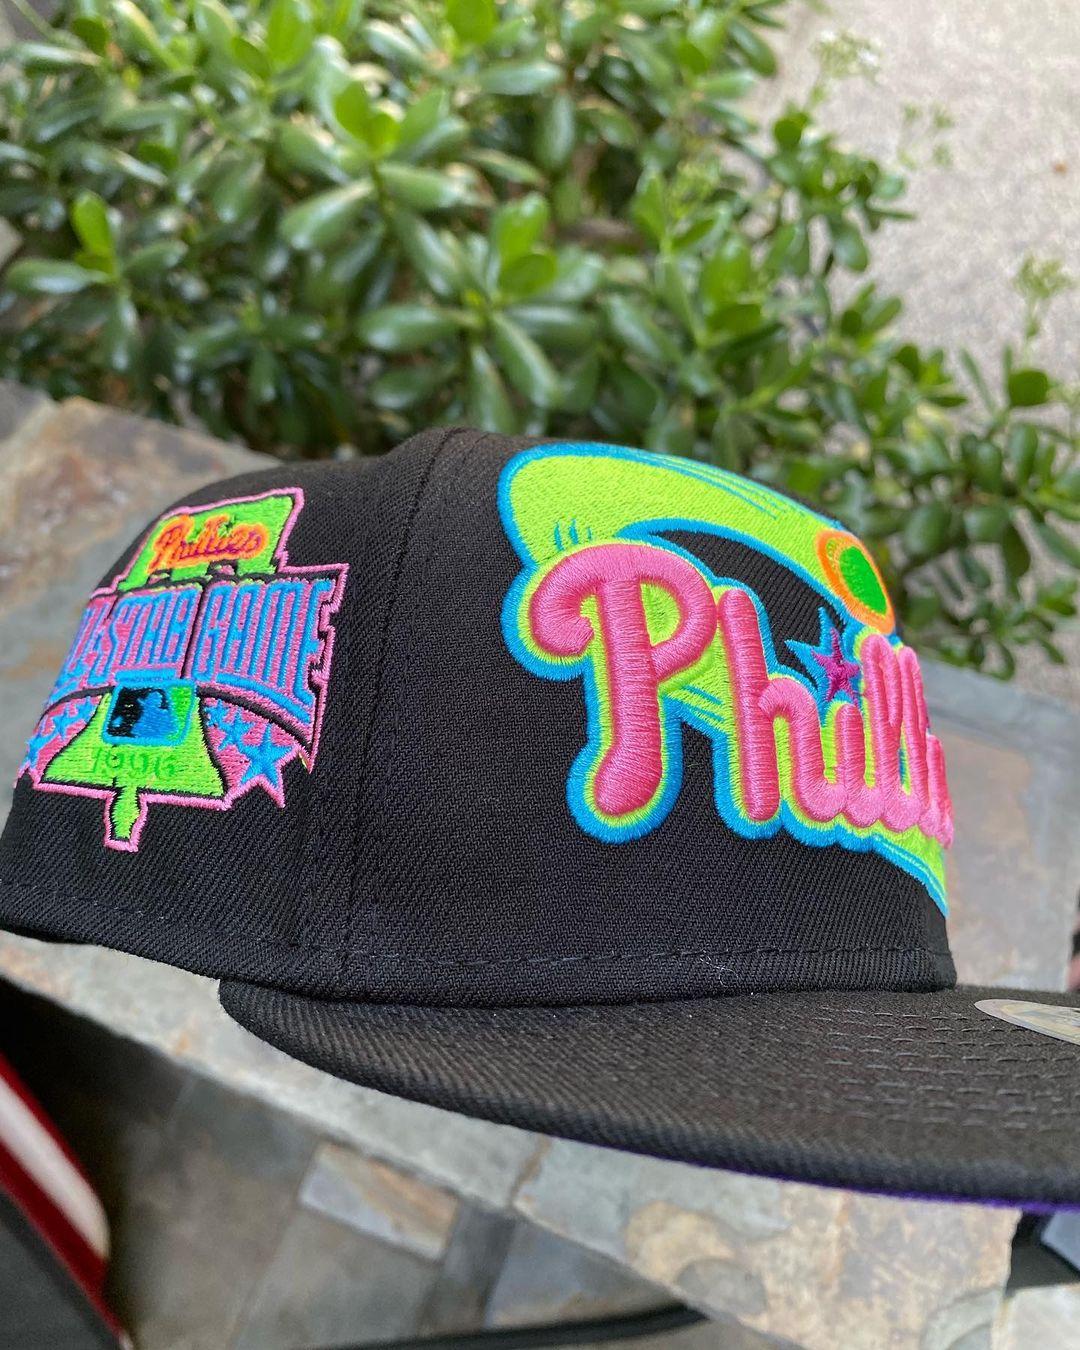 Fresh Prince of Bel Air Philadelphia Phillies Fitted Hat